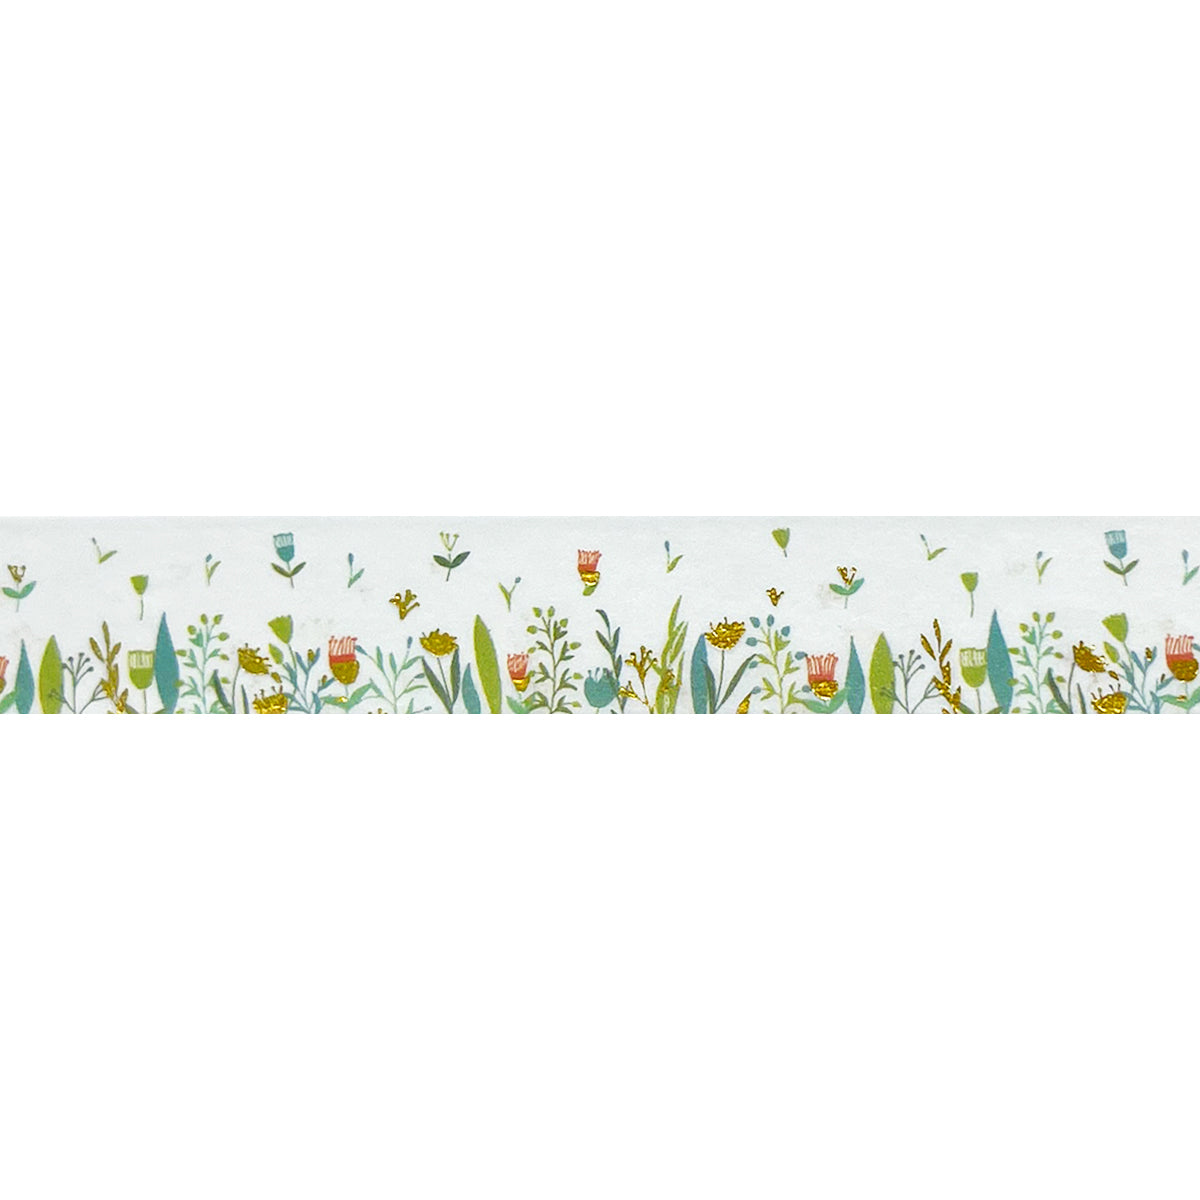 Wrapables Gold and Silver Foil Washi Masking Tape